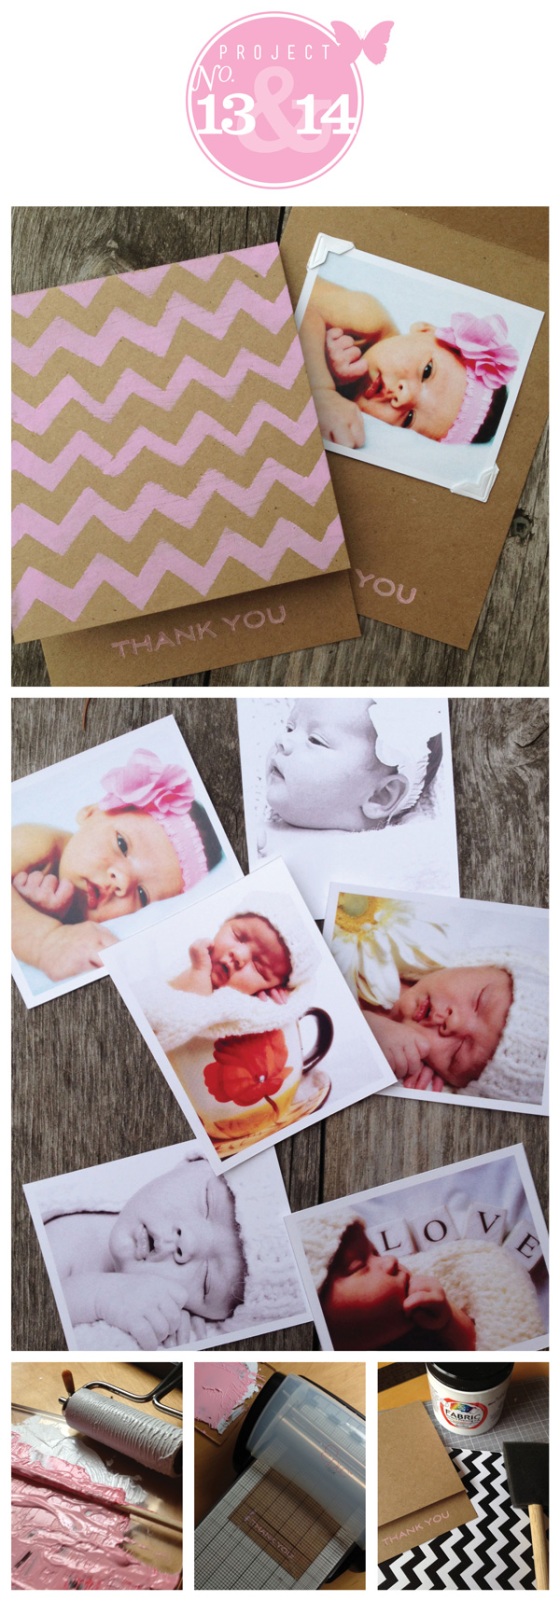 Thank you cards chevron pink & brown sweet nothings design